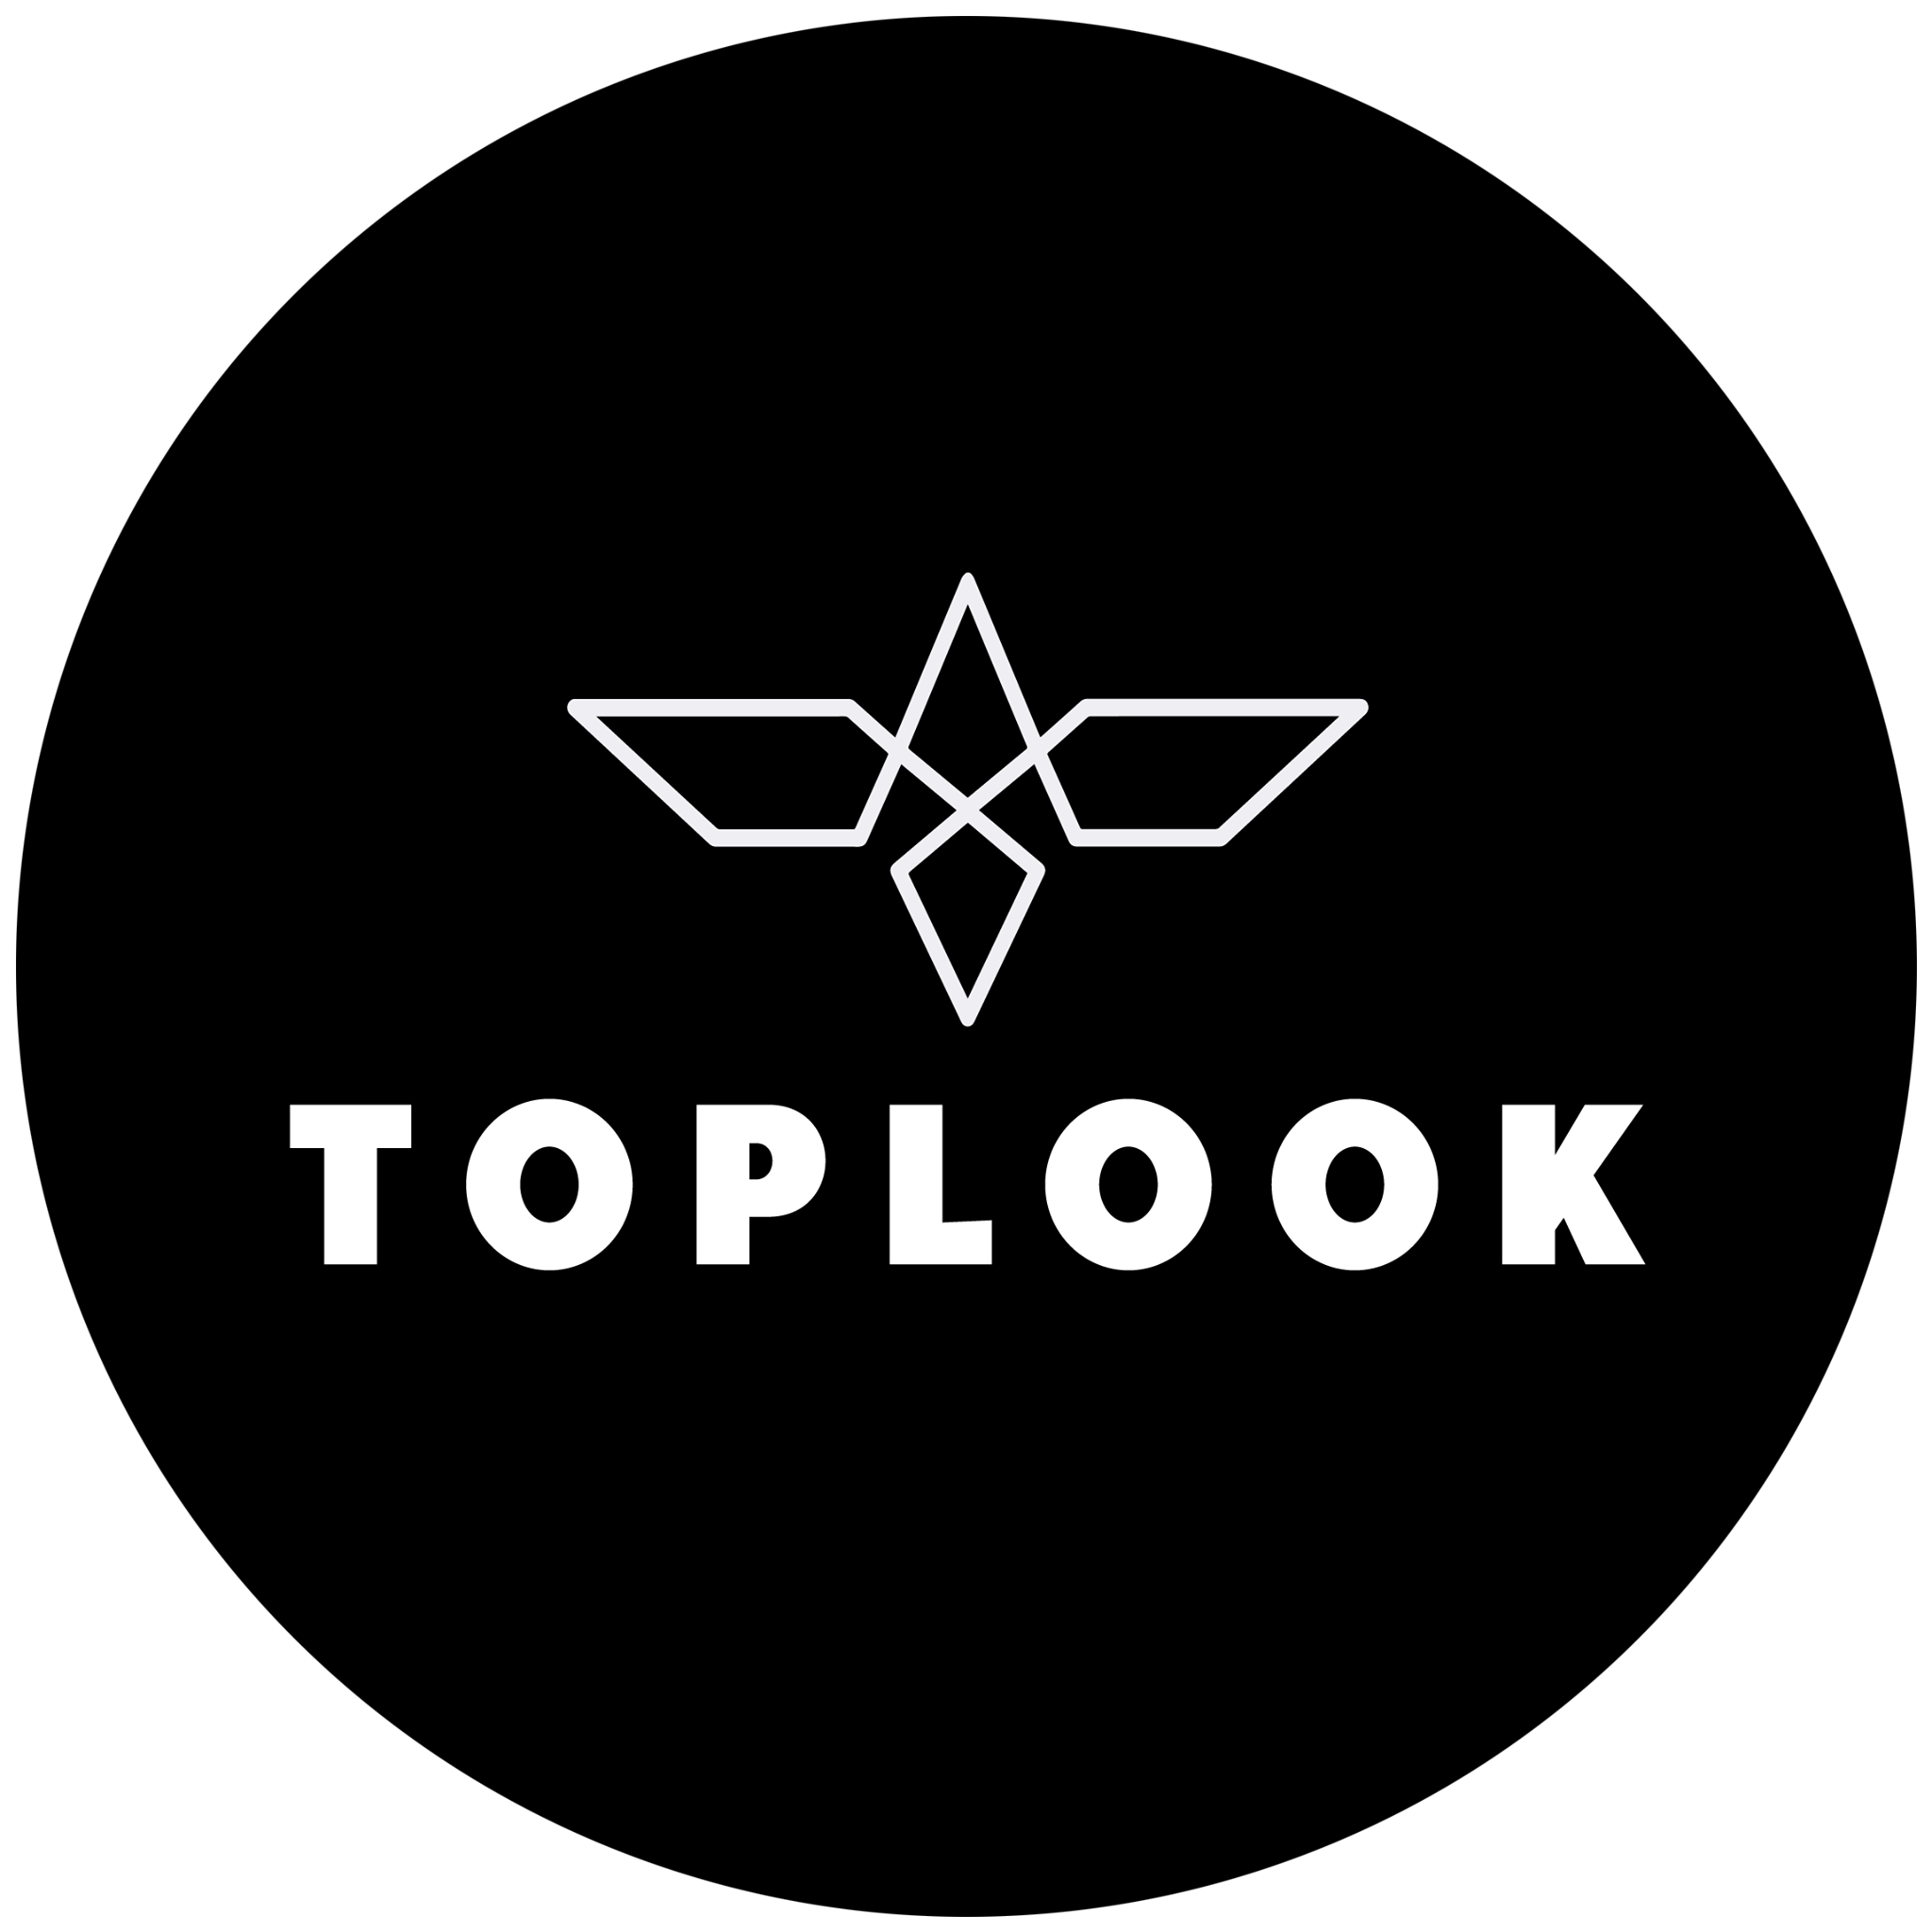 TOPLOOK LONDON, A New UK High Street Fashion Brand for Stylish Clothing at Affordable Prices